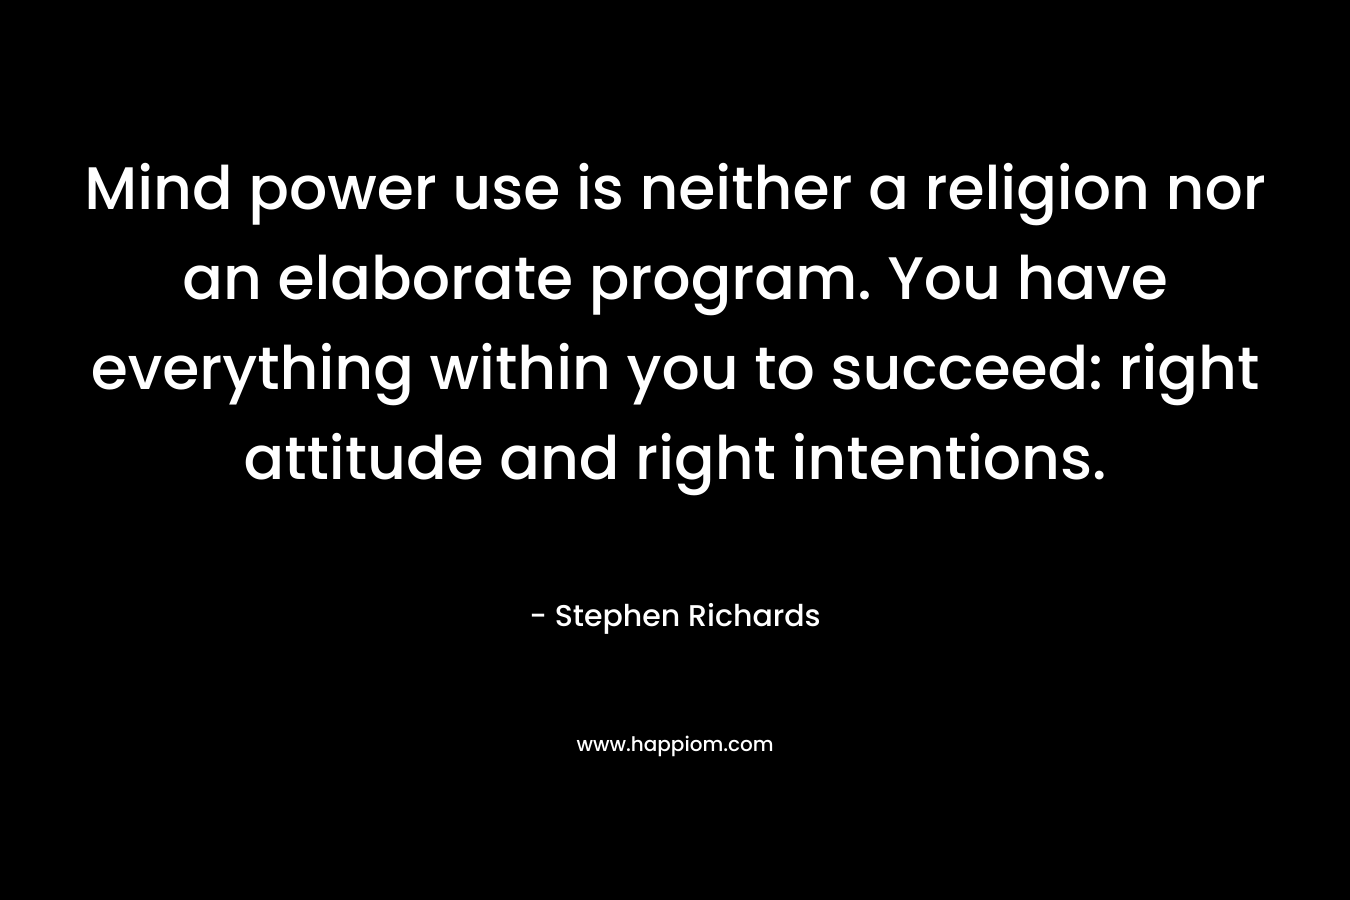 Mind power use is neither a religion nor an elaborate program. You have everything within you to succeed: right attitude and right intentions. – Stephen Richards